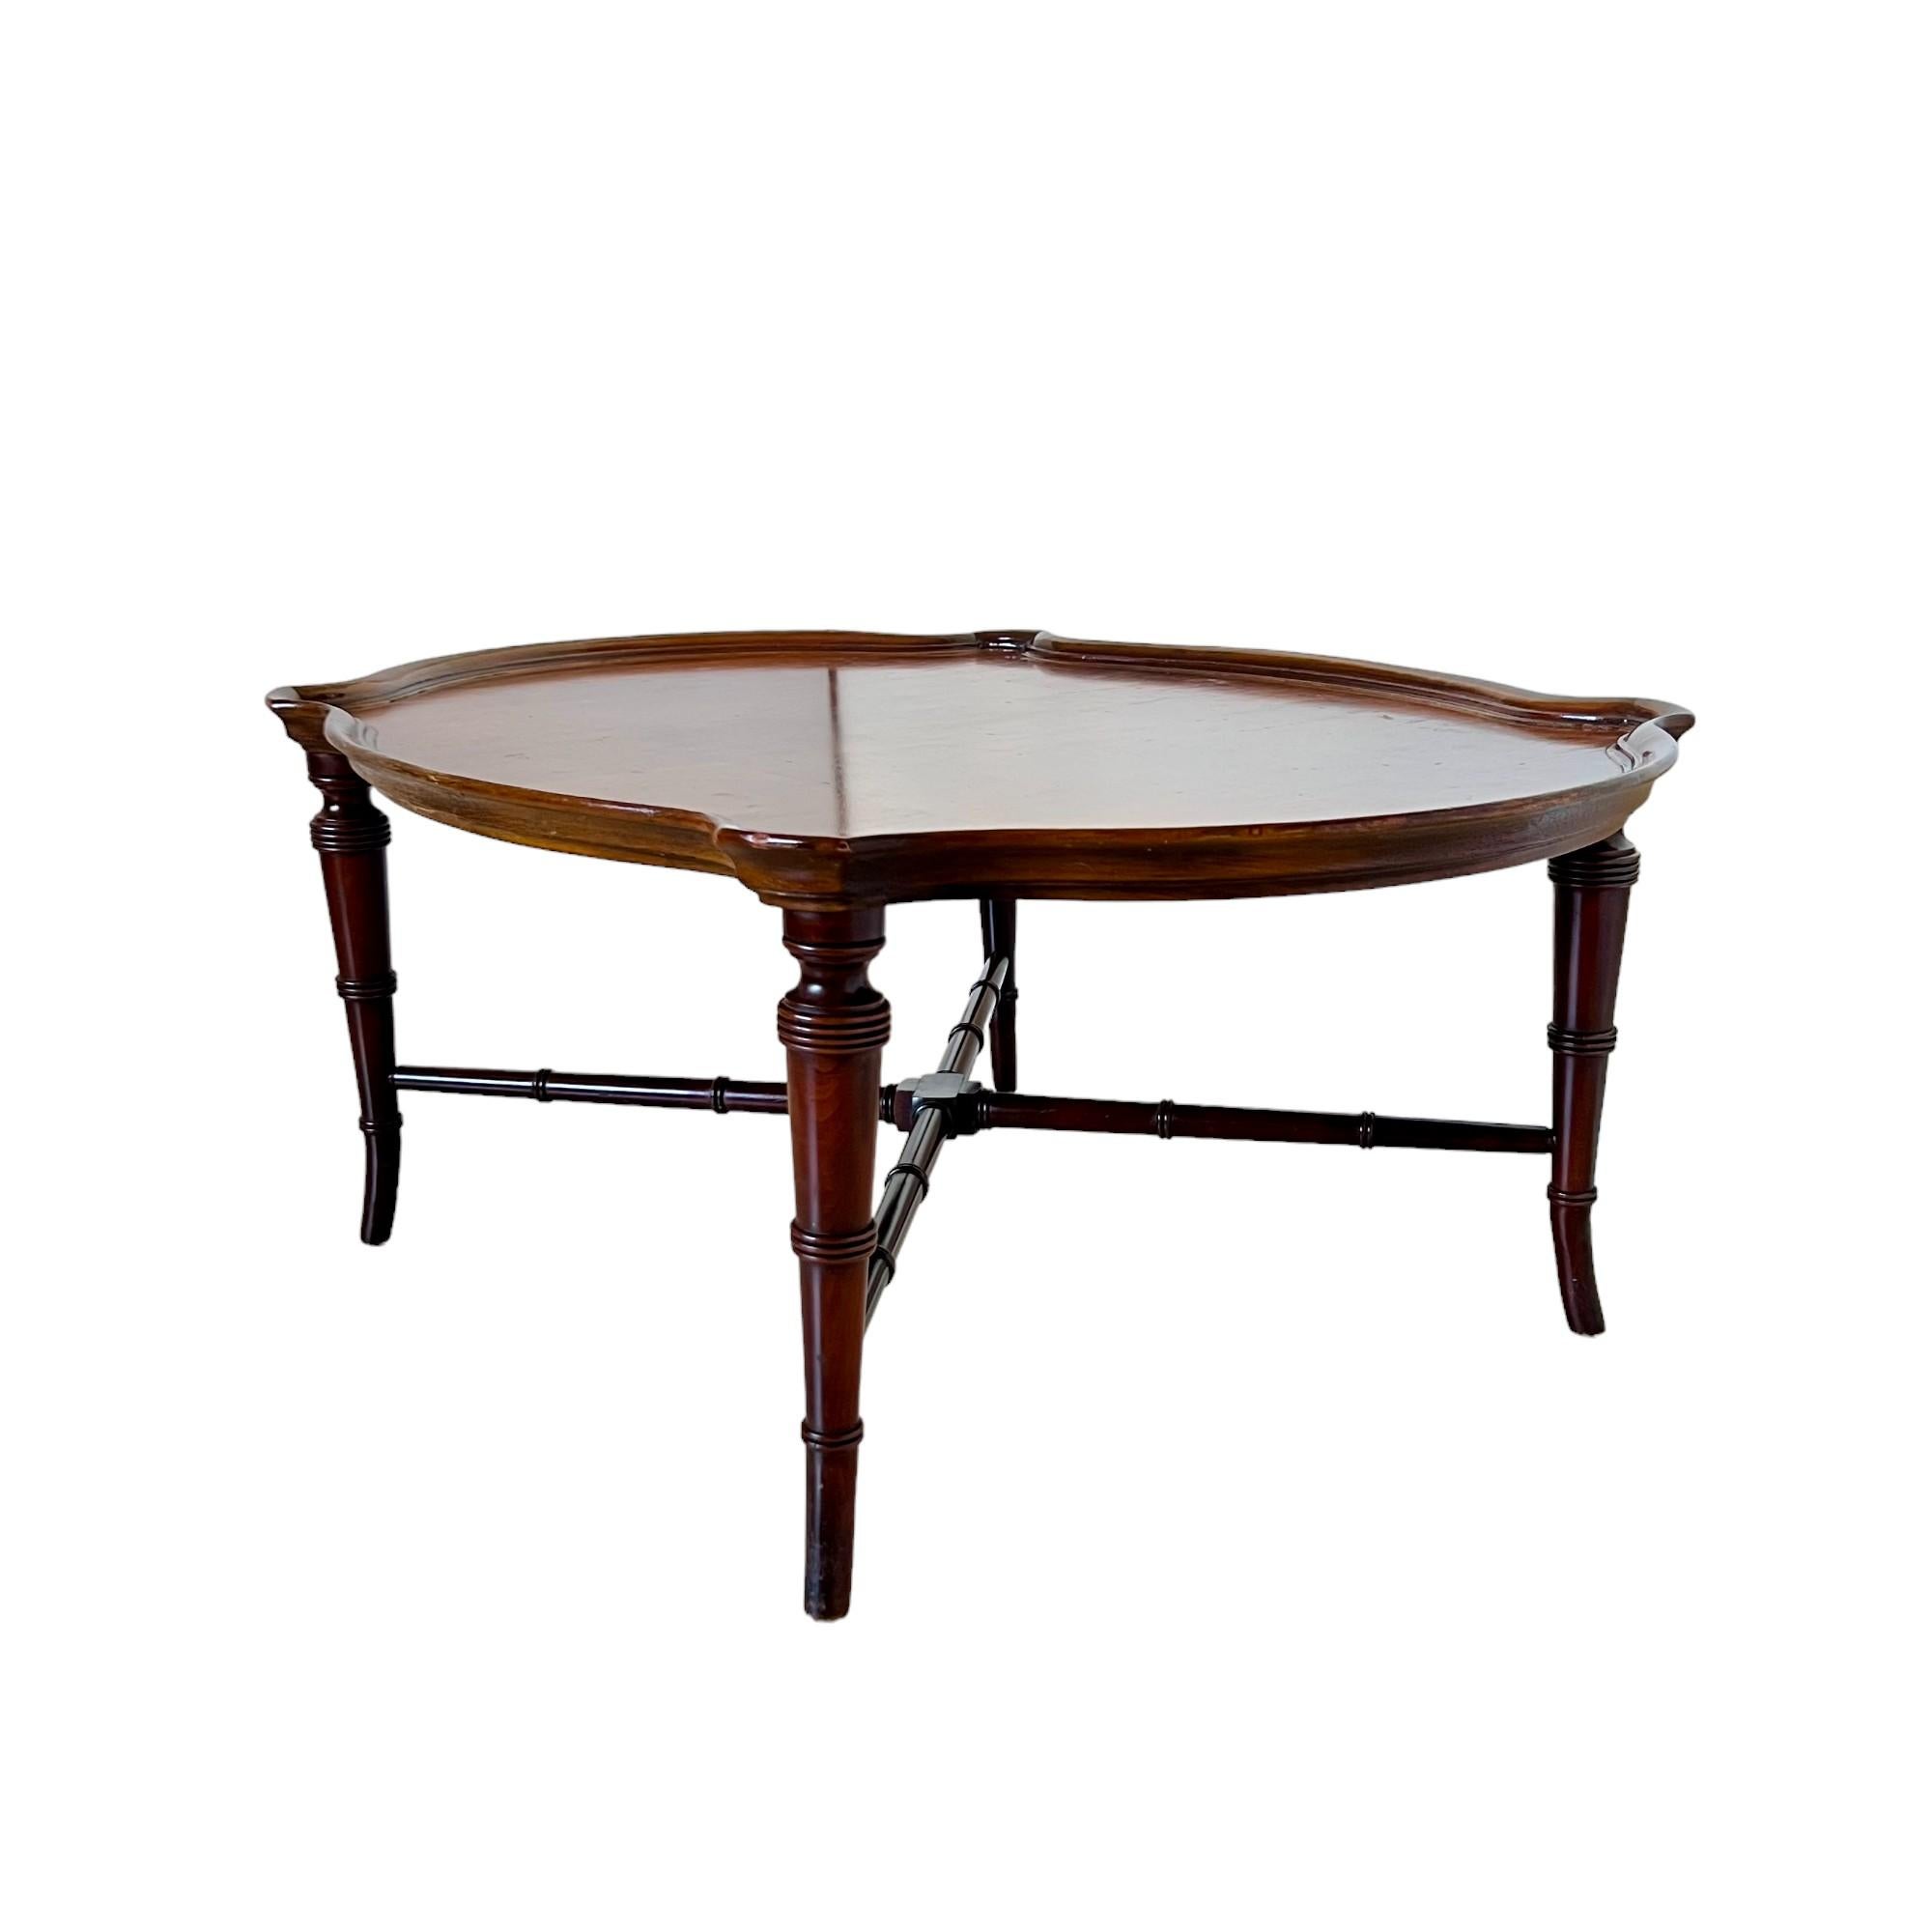 20th Century Vintage Hekman Chinoiserie Burl Top Faux Bamboo Oval Coffee Table